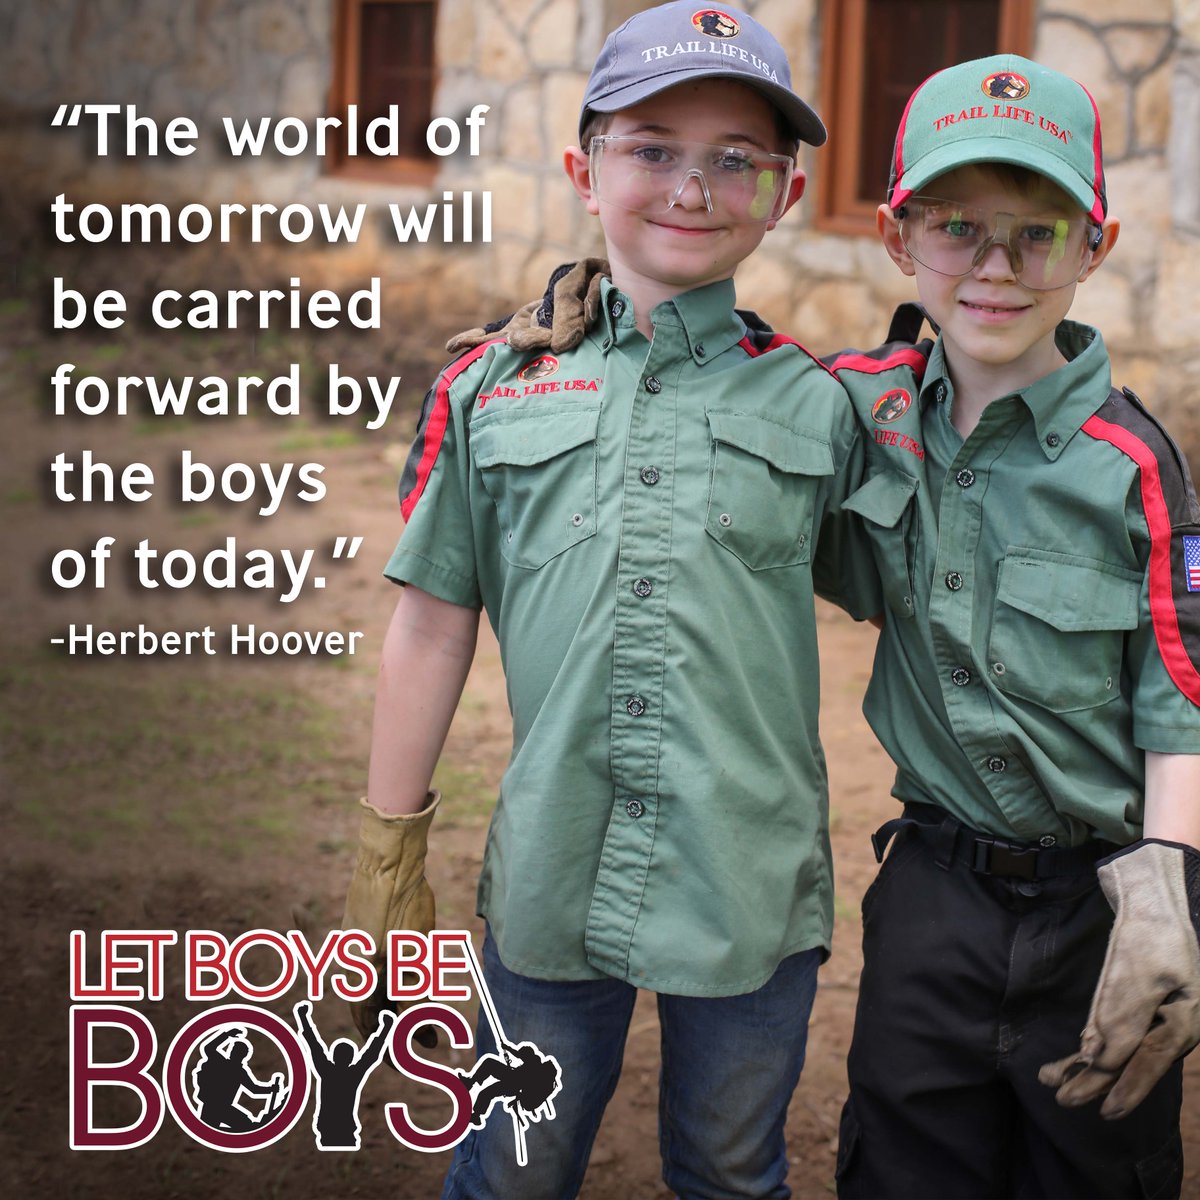 'There are two jobs for American boys today. One is being a boy. The other is growing up to be a man. Both jobs are important.' -Herbert Hoover Read more: traillifeusa.co/3vpU4cr. #traillifeusa #herberthoover #letboysbeboys